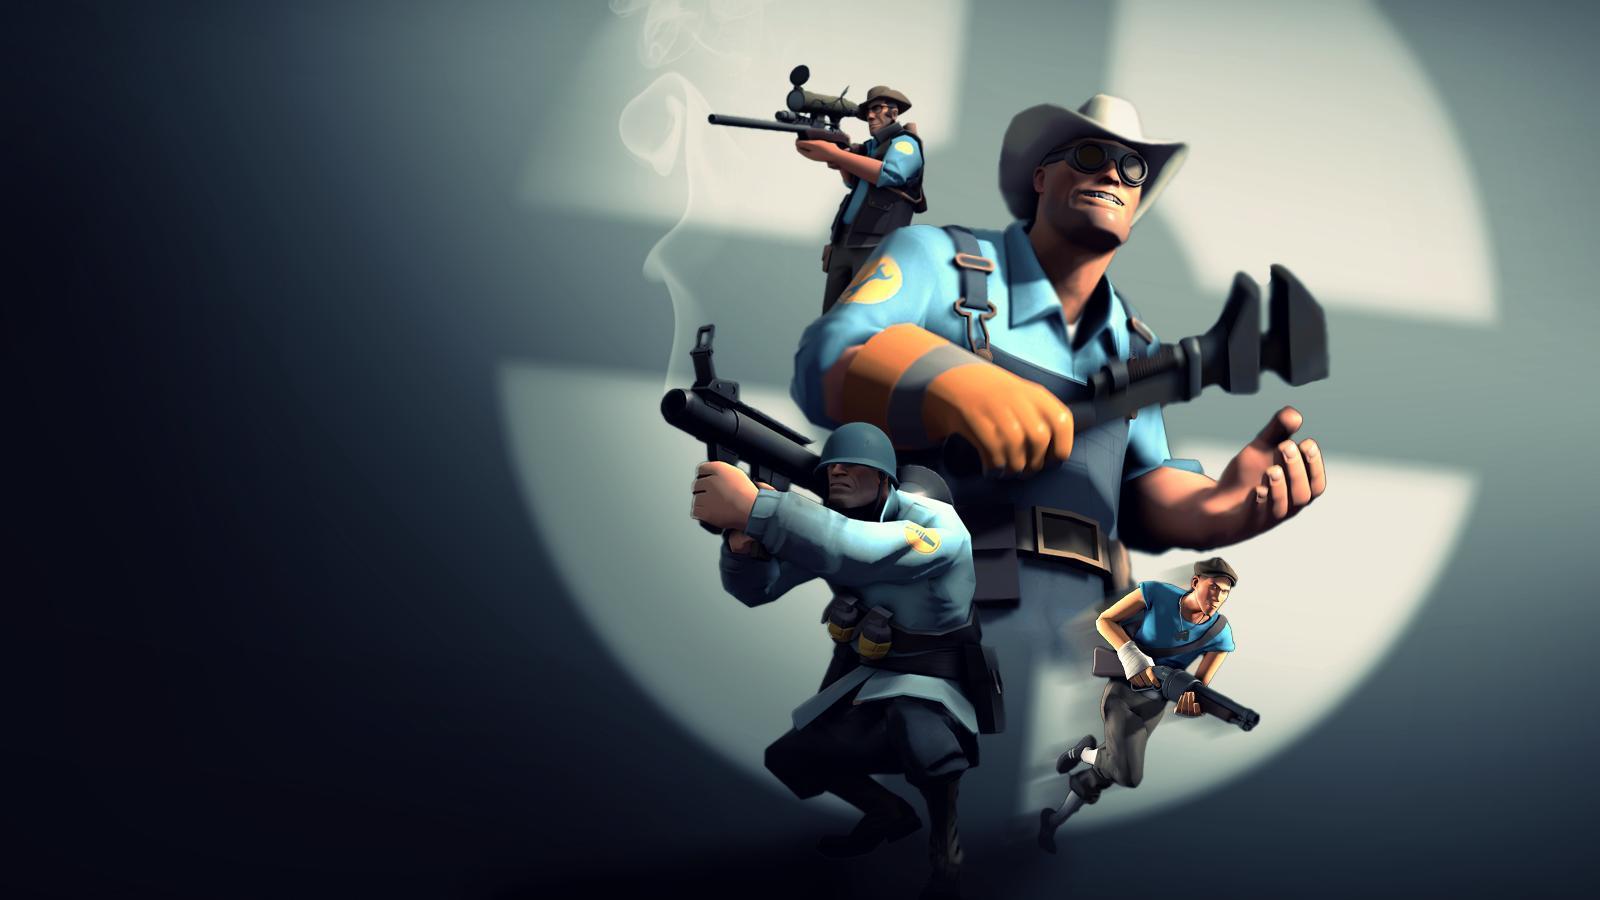 image For > Tf2 Wallpaper